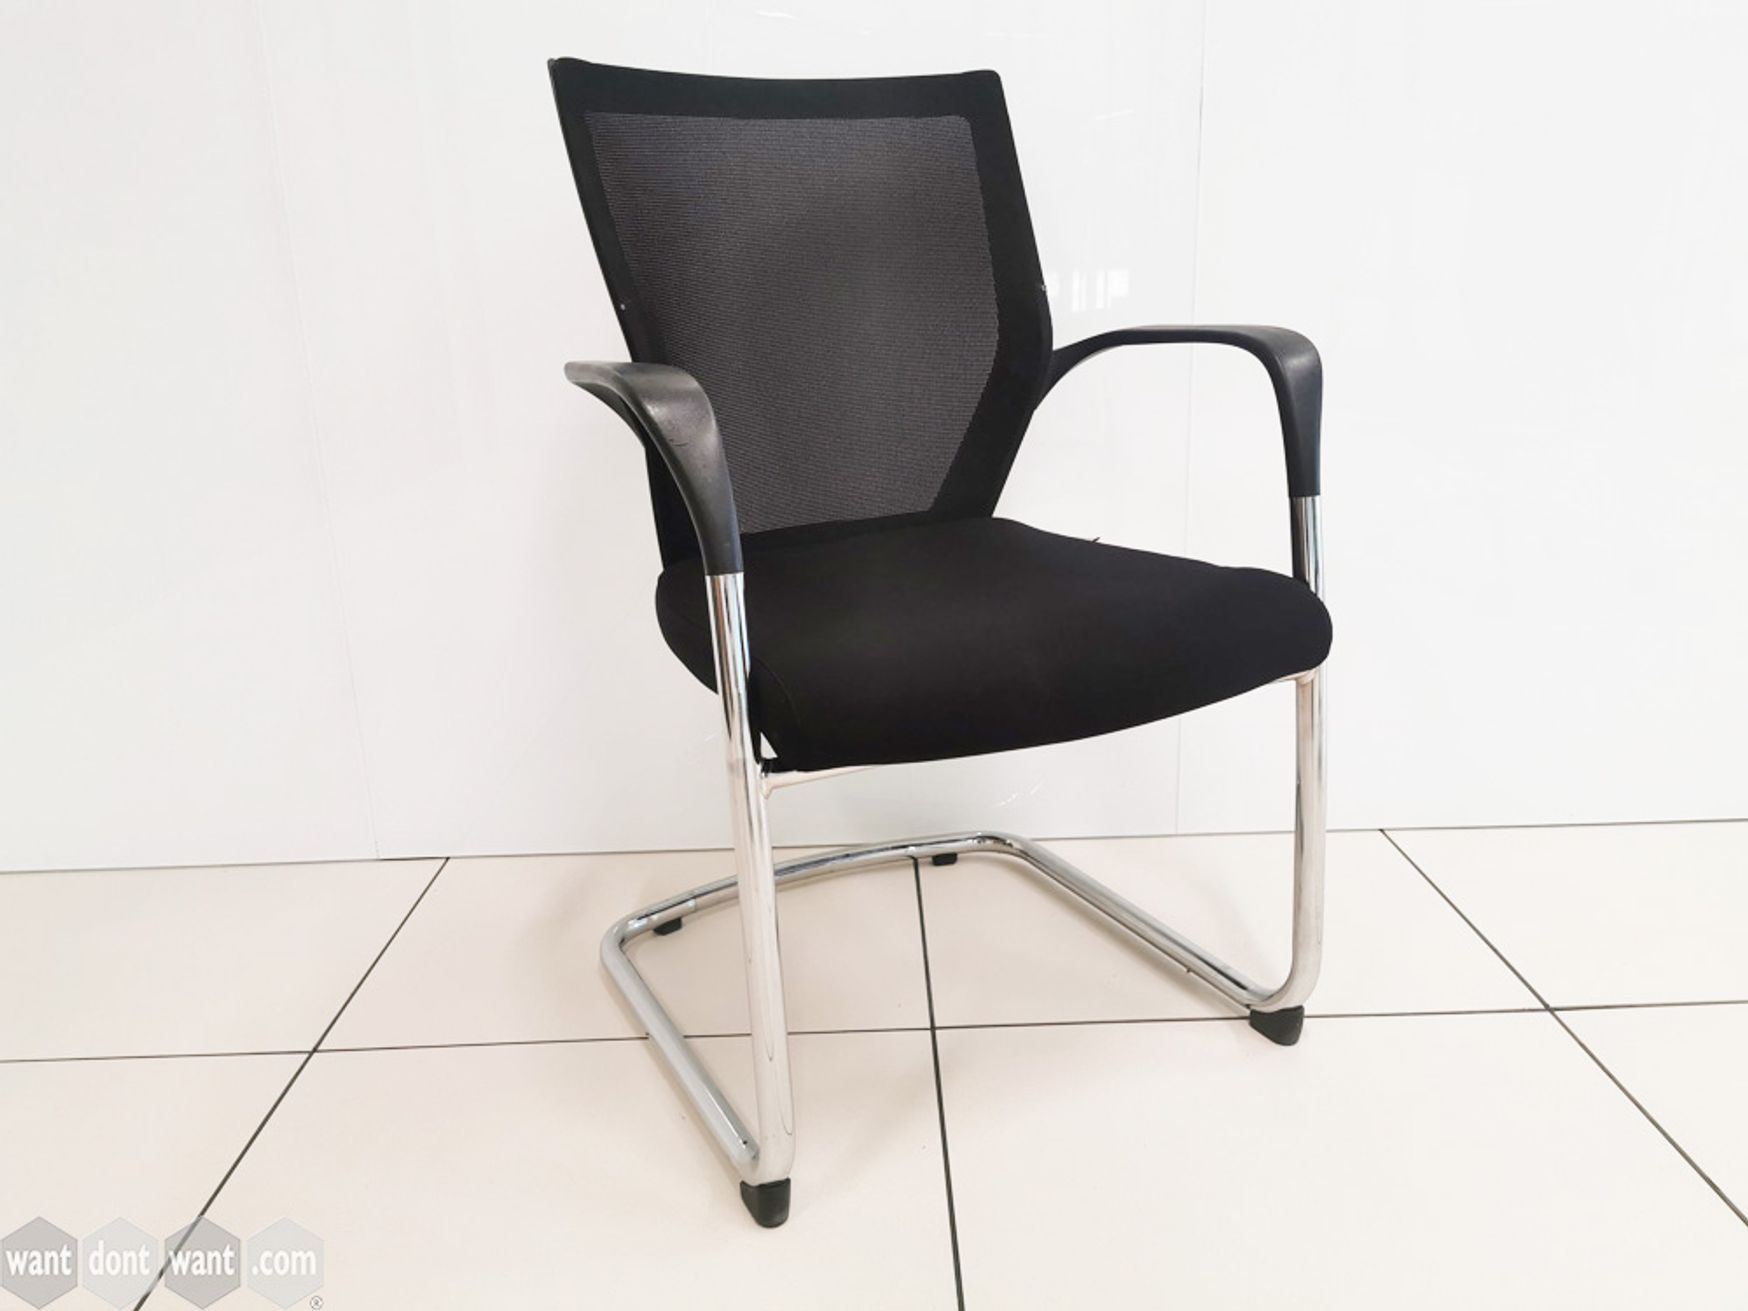 Techo Sidiz meeting chairs with mesh backs and black upholstered seat.